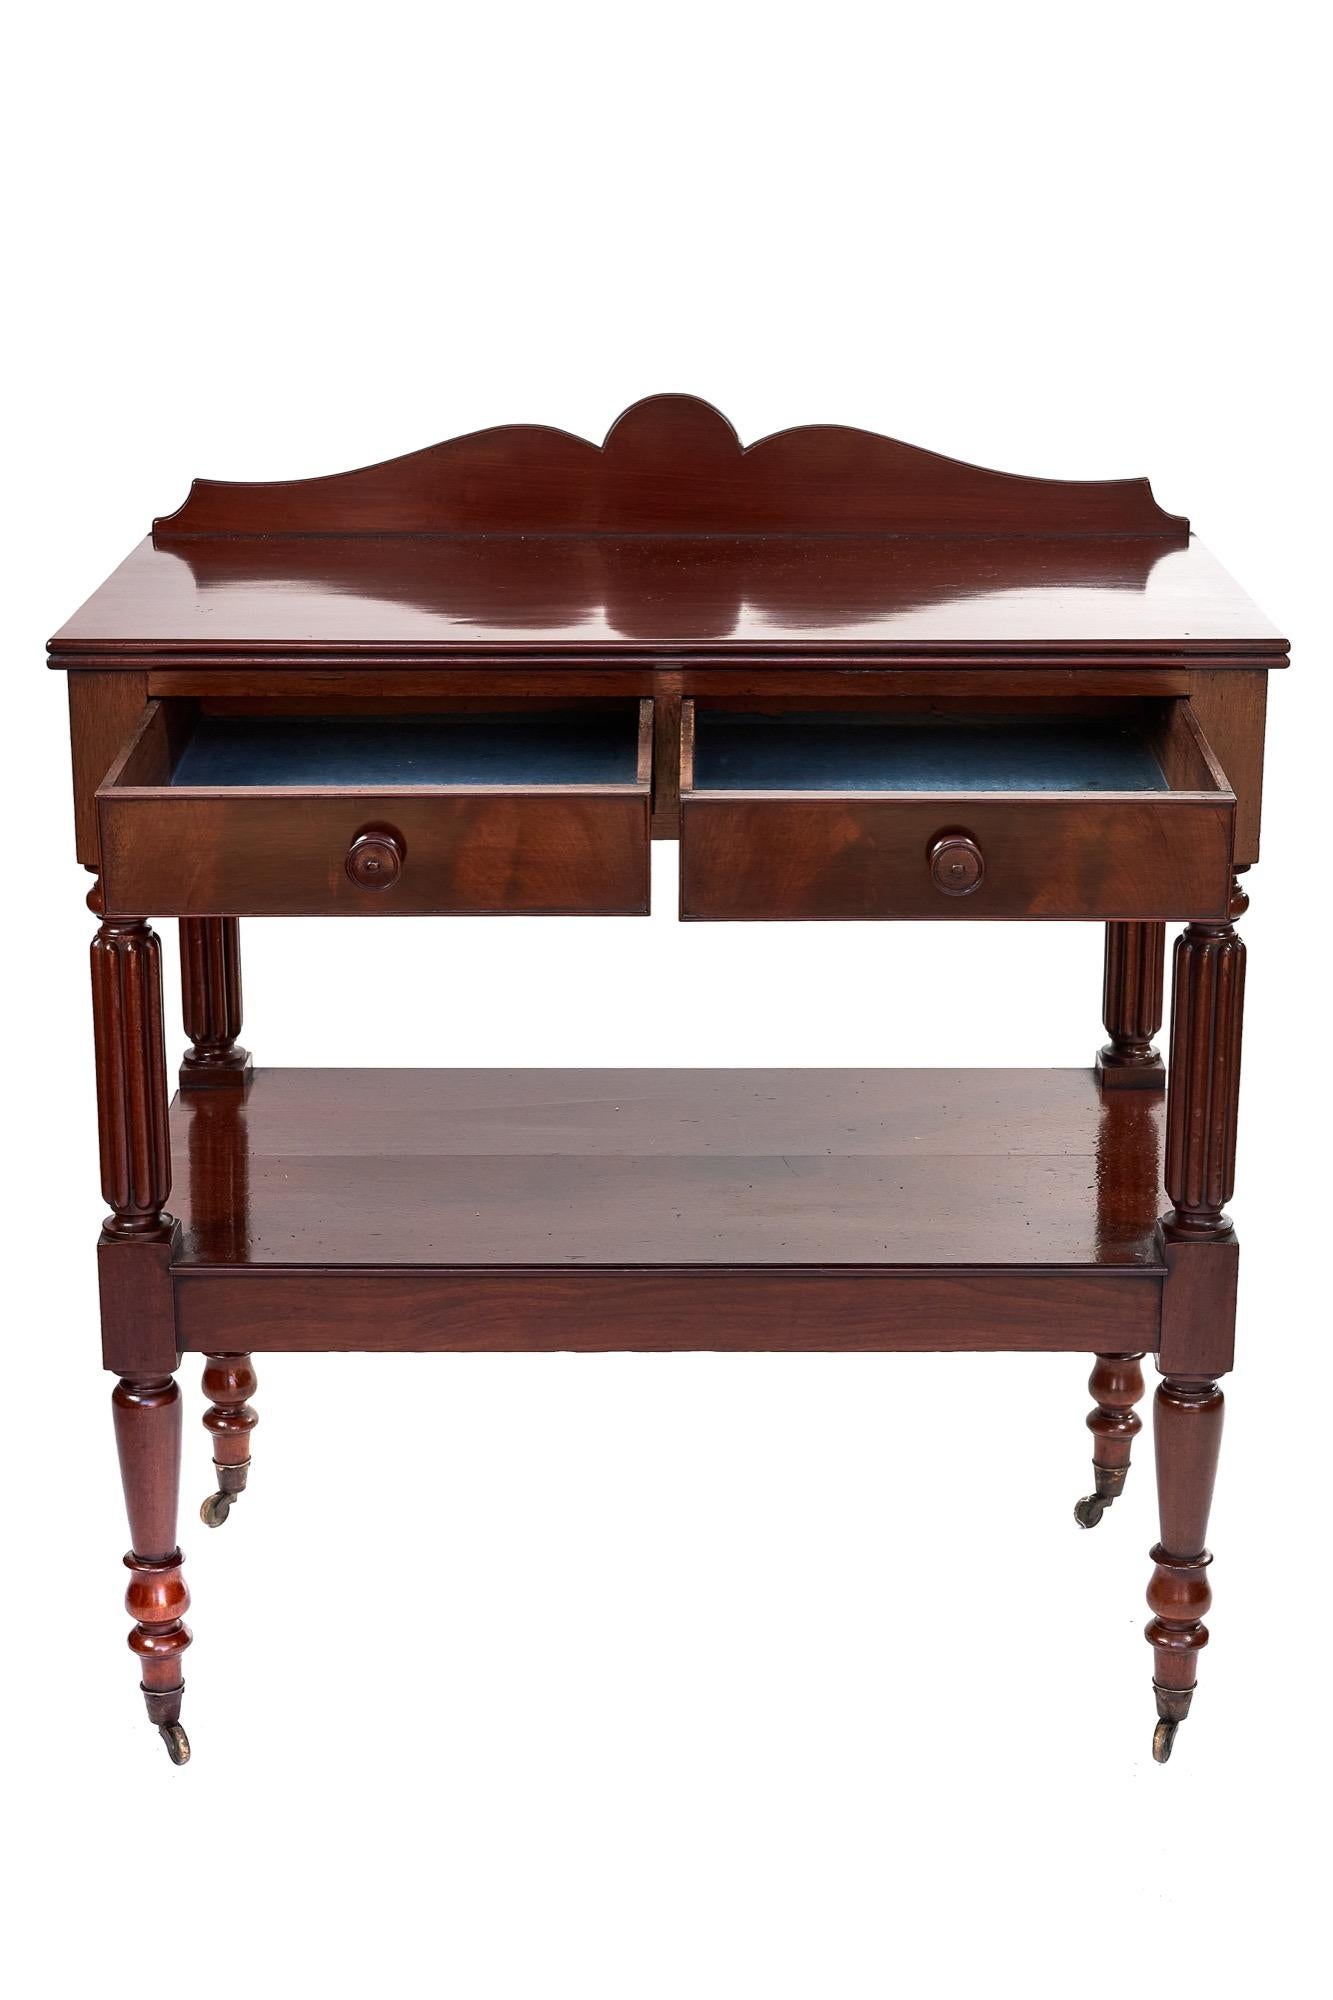 Regency mahogany antique two-drawer serving table having a quality mahogany top with reeded edge. It boasts an attractive shaped upstand, two drawers with turned mahogany knobs which open to reveal the original blue lined paper. The four supports